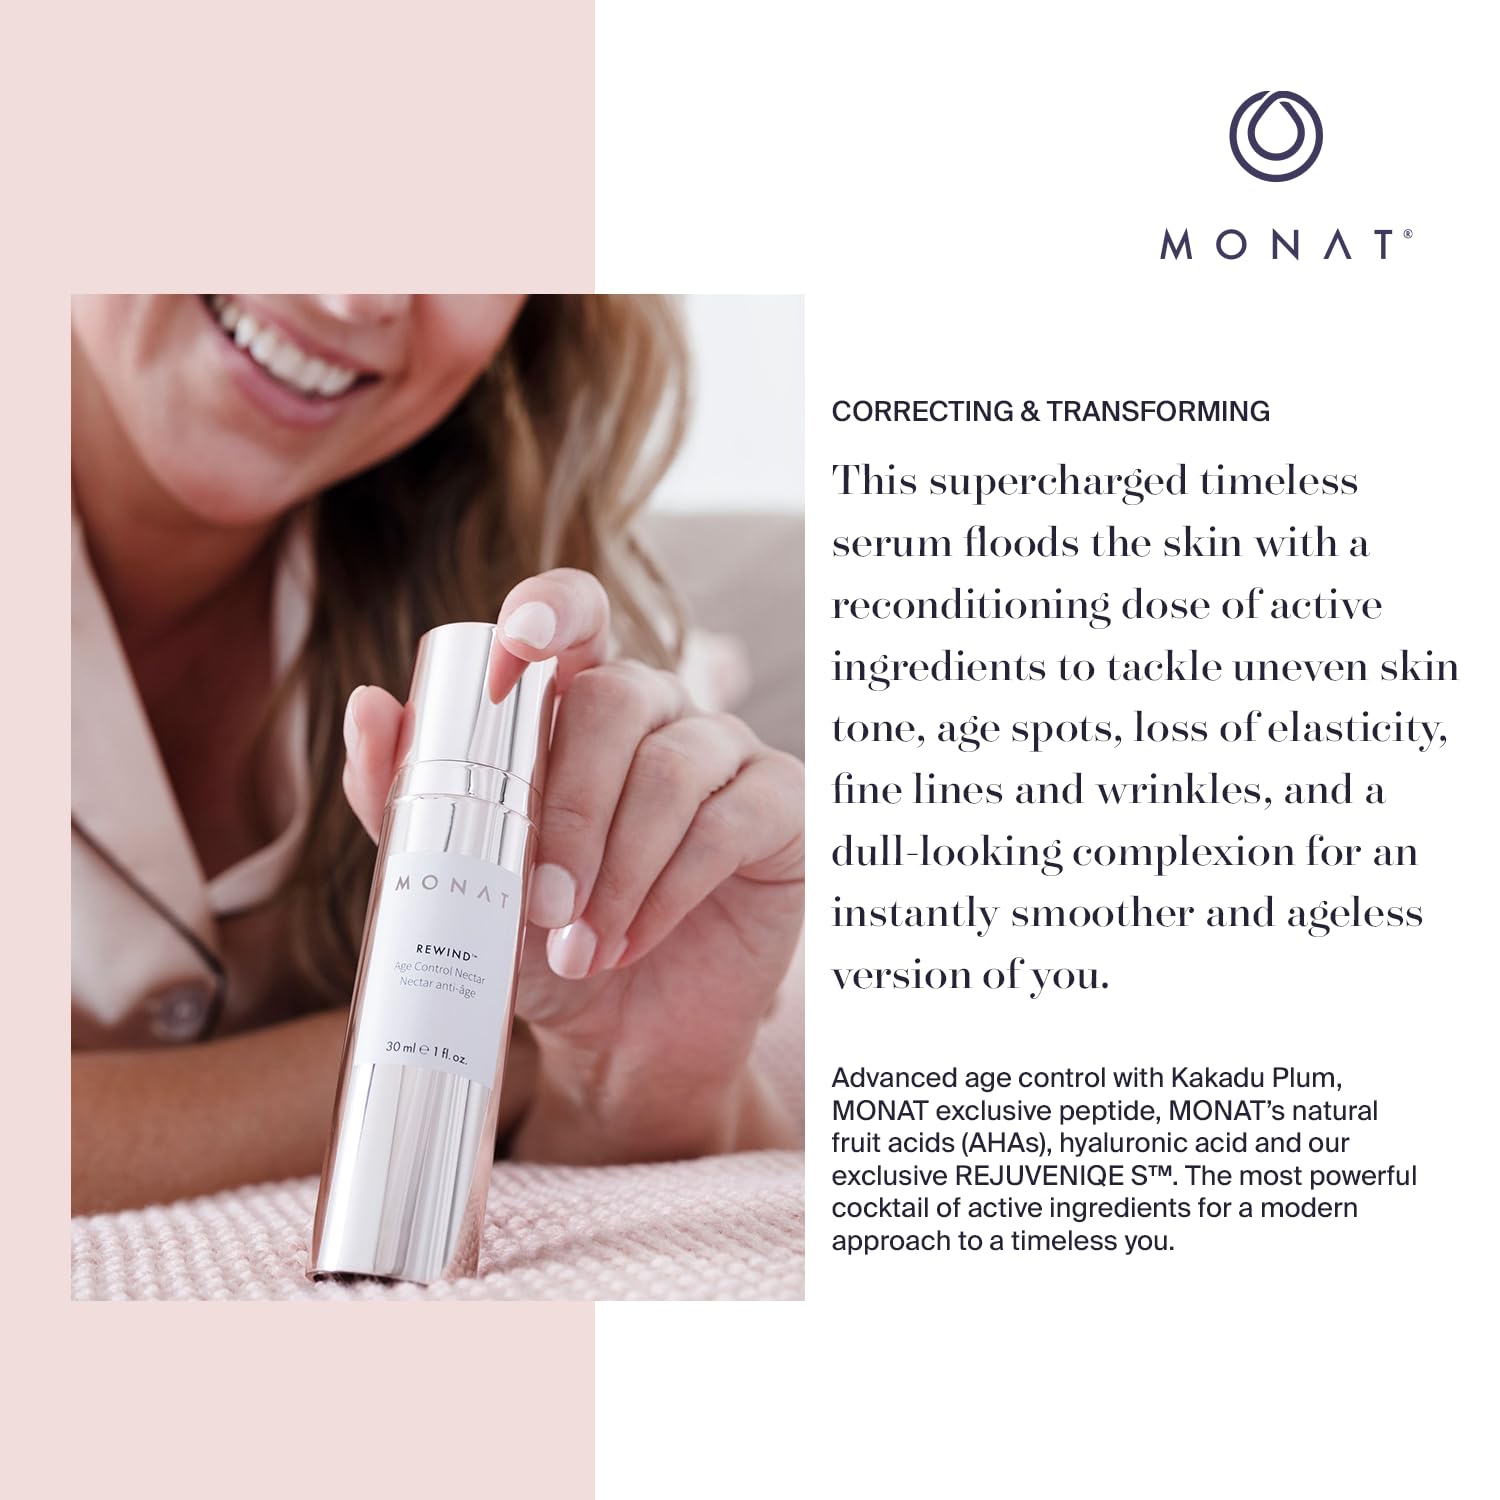 MONAT Rewind Age Control Nectar - Fast Absorbing Hydrating Serum. Skin Perfecting Natural AHA. Correcting & Transforming Face Serum, Anti Aging Face Cream w/Hyaluronic Acid - Net Wt 30 ml / 1 fl. oz. : Beauty & Personal Care